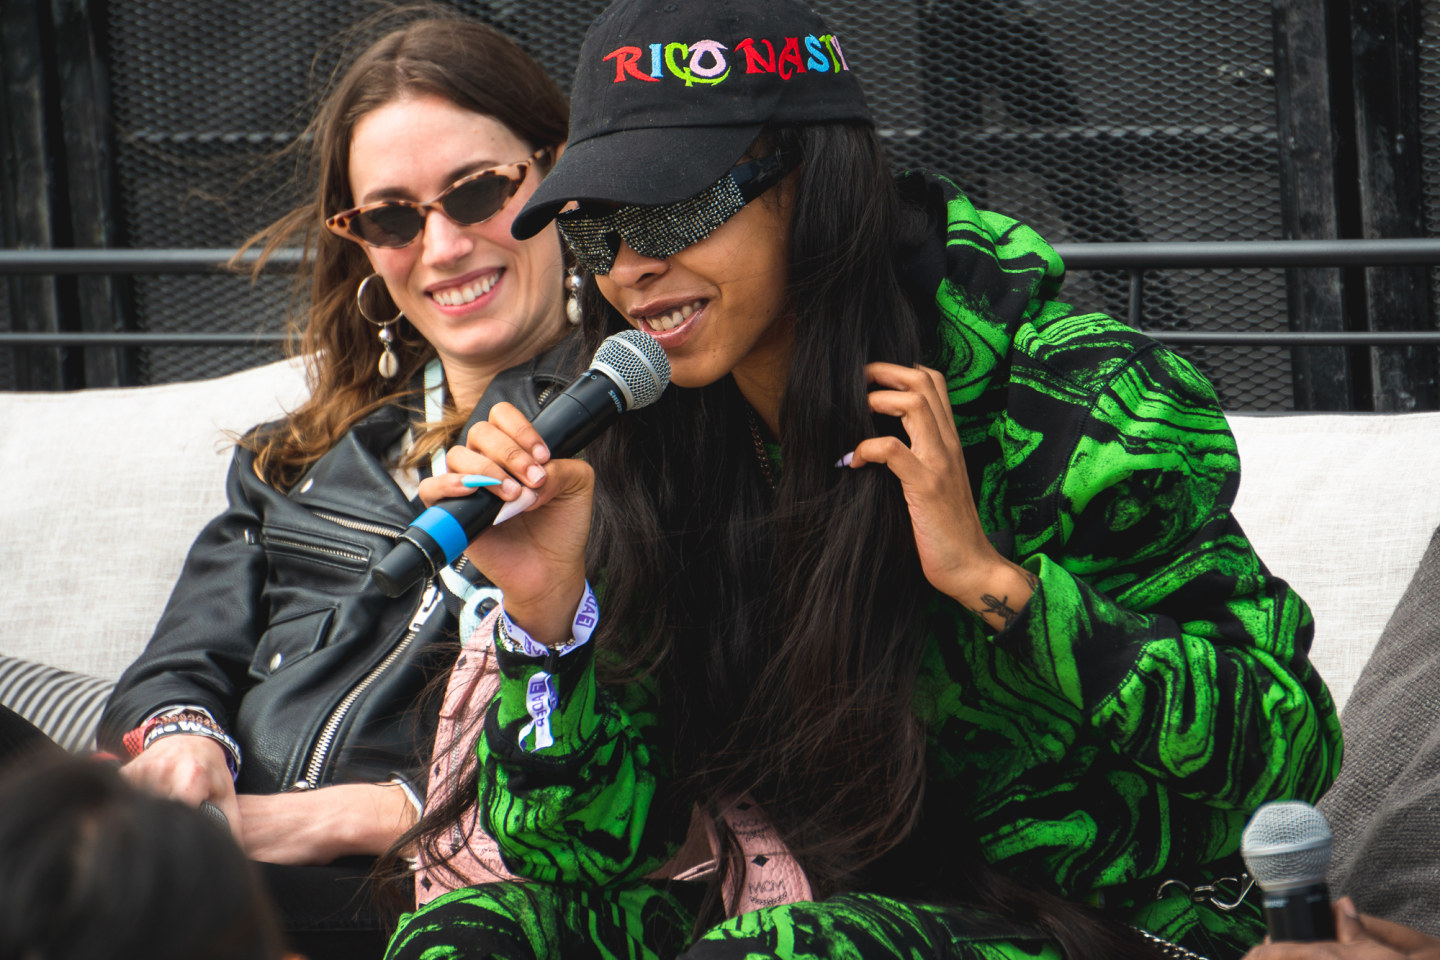 32 perfect photos from Day 3 of FADER FORT 2019